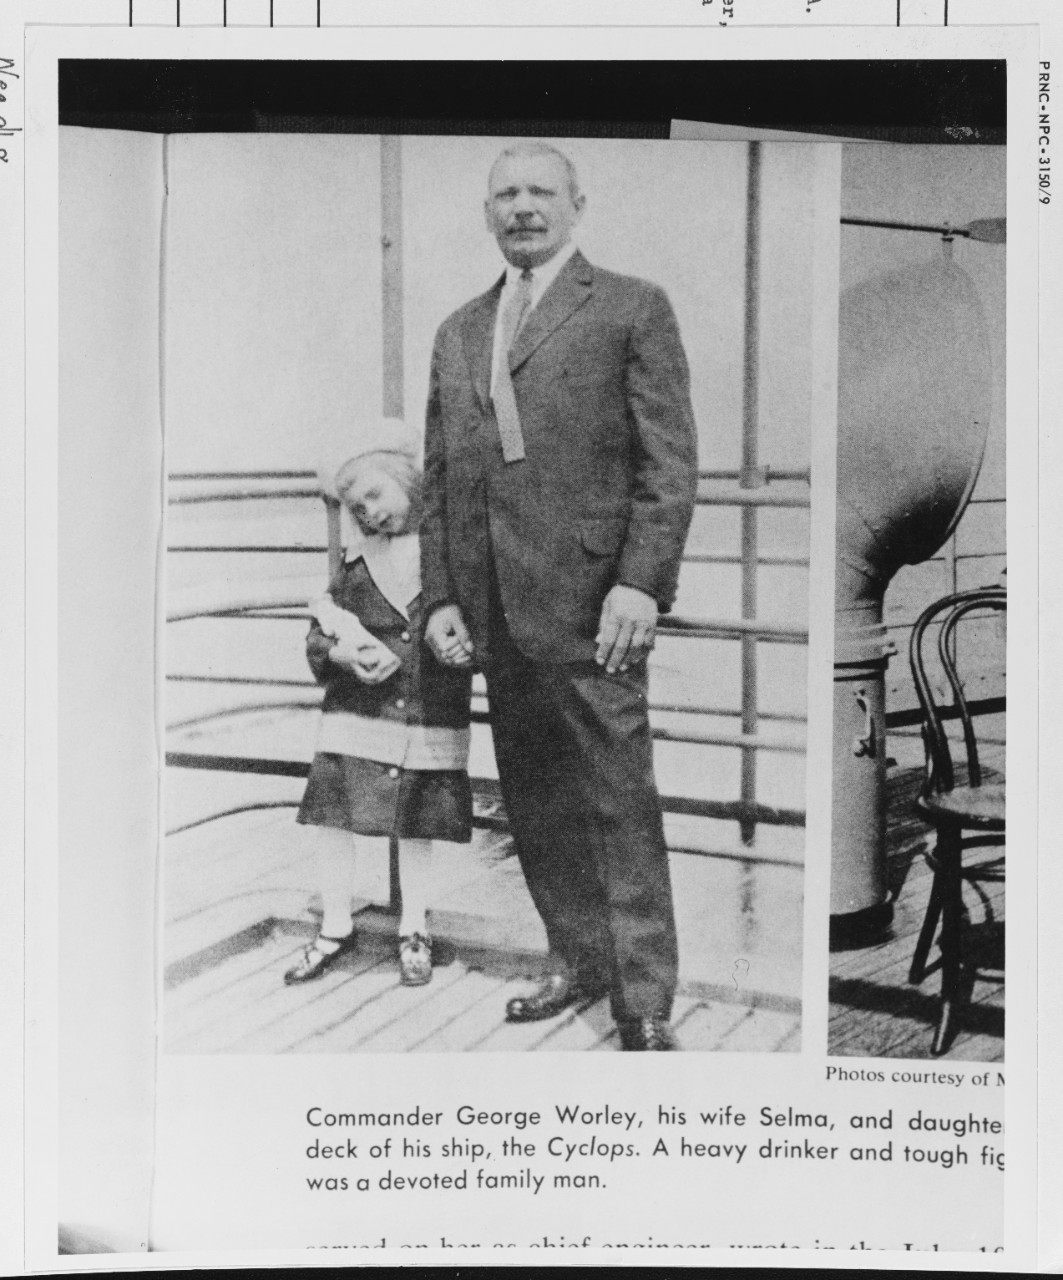 Capt George W. Worley and his daughter